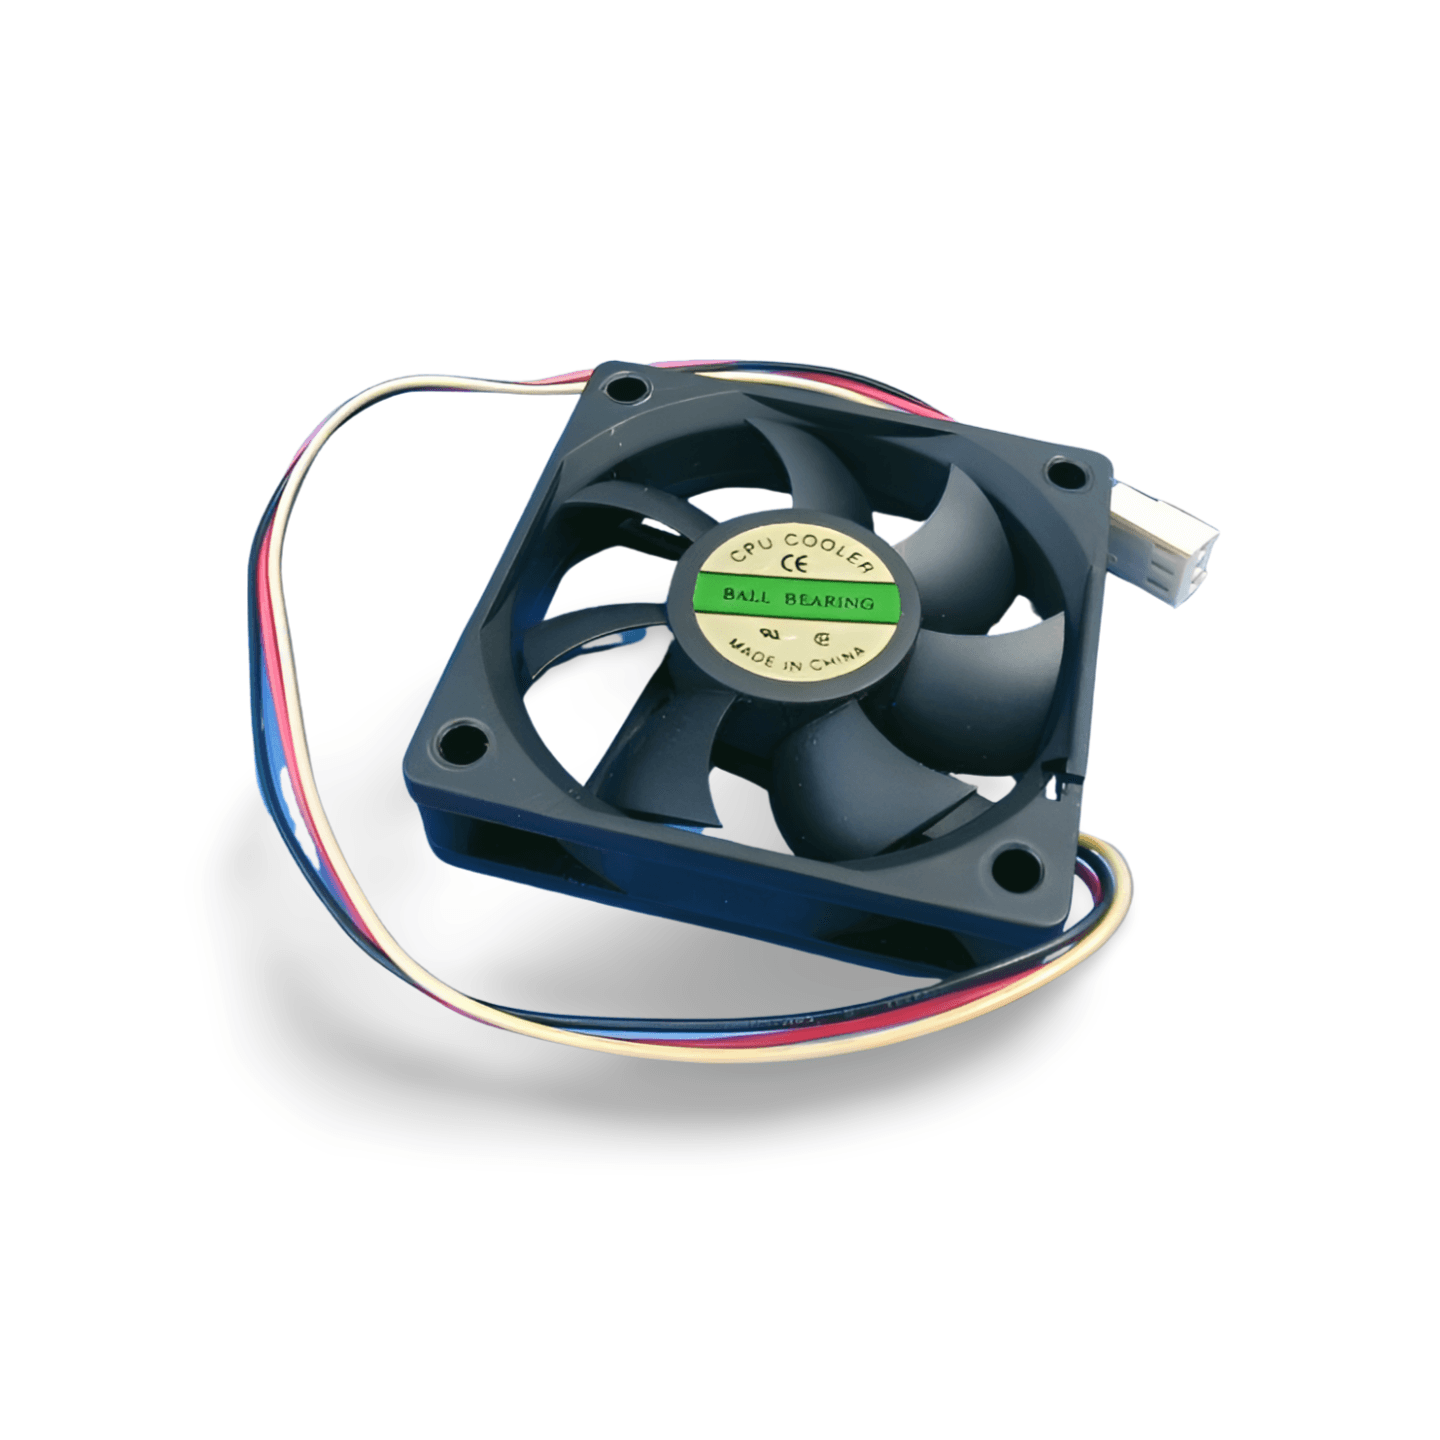 60x60 Tower Case Fan BB With Cable 3 Wire black